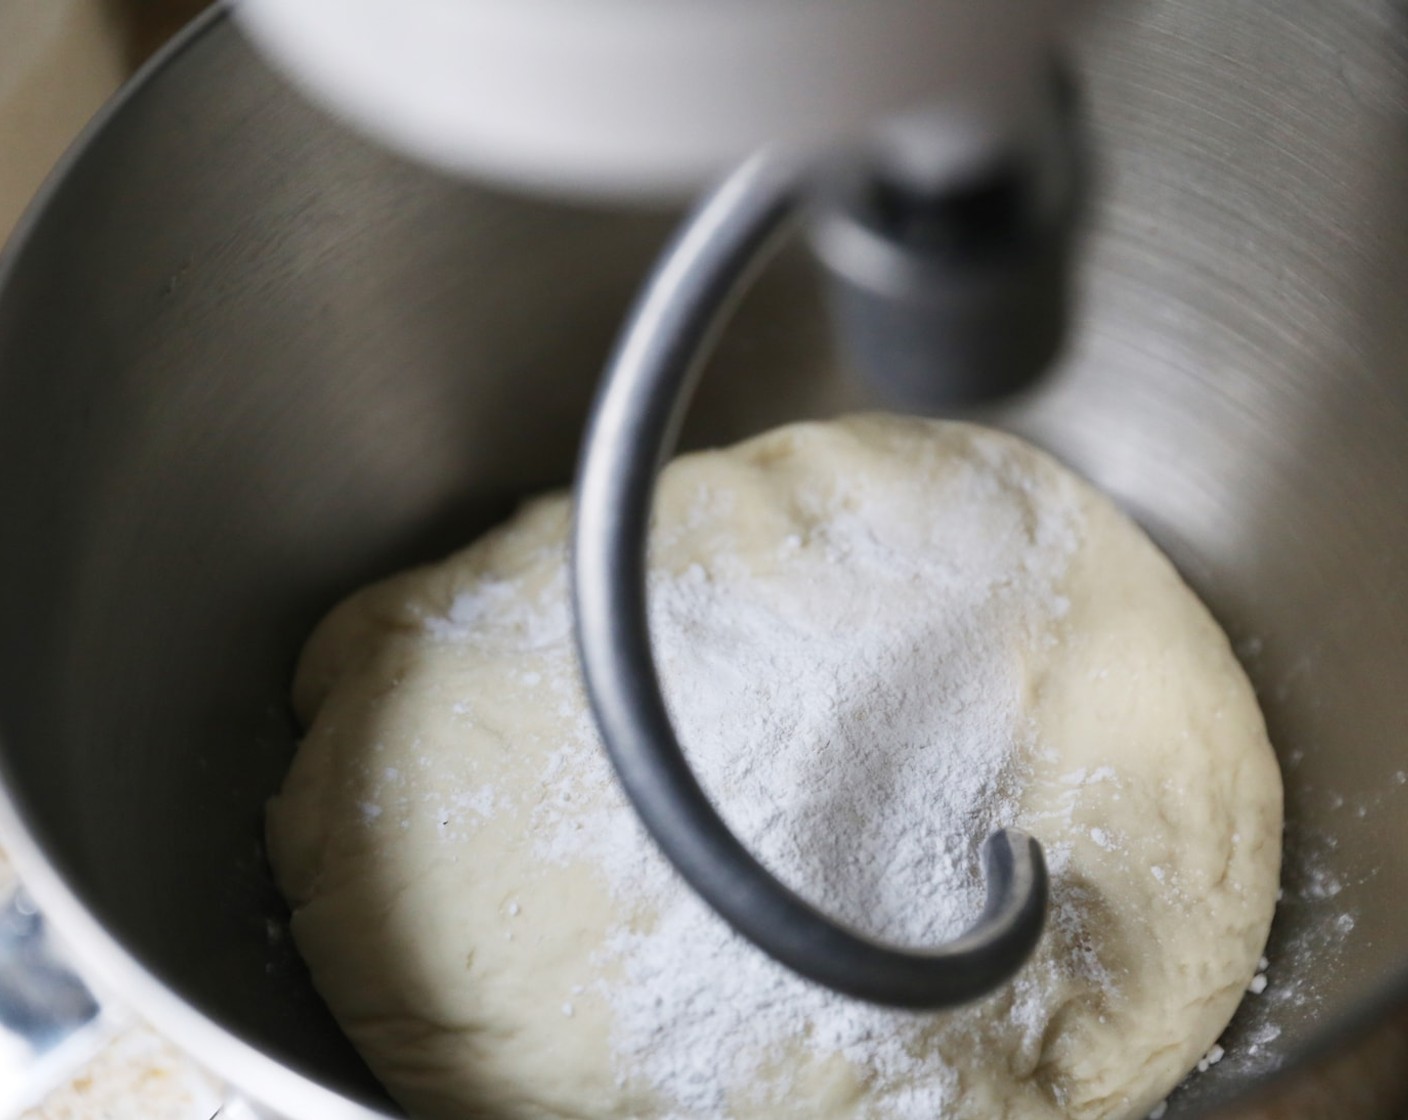 step 7 Place the dough back in the bowl of a stand mixer and add the Baking Powder (1 tsp) and knead into the dough for 5 minutes.